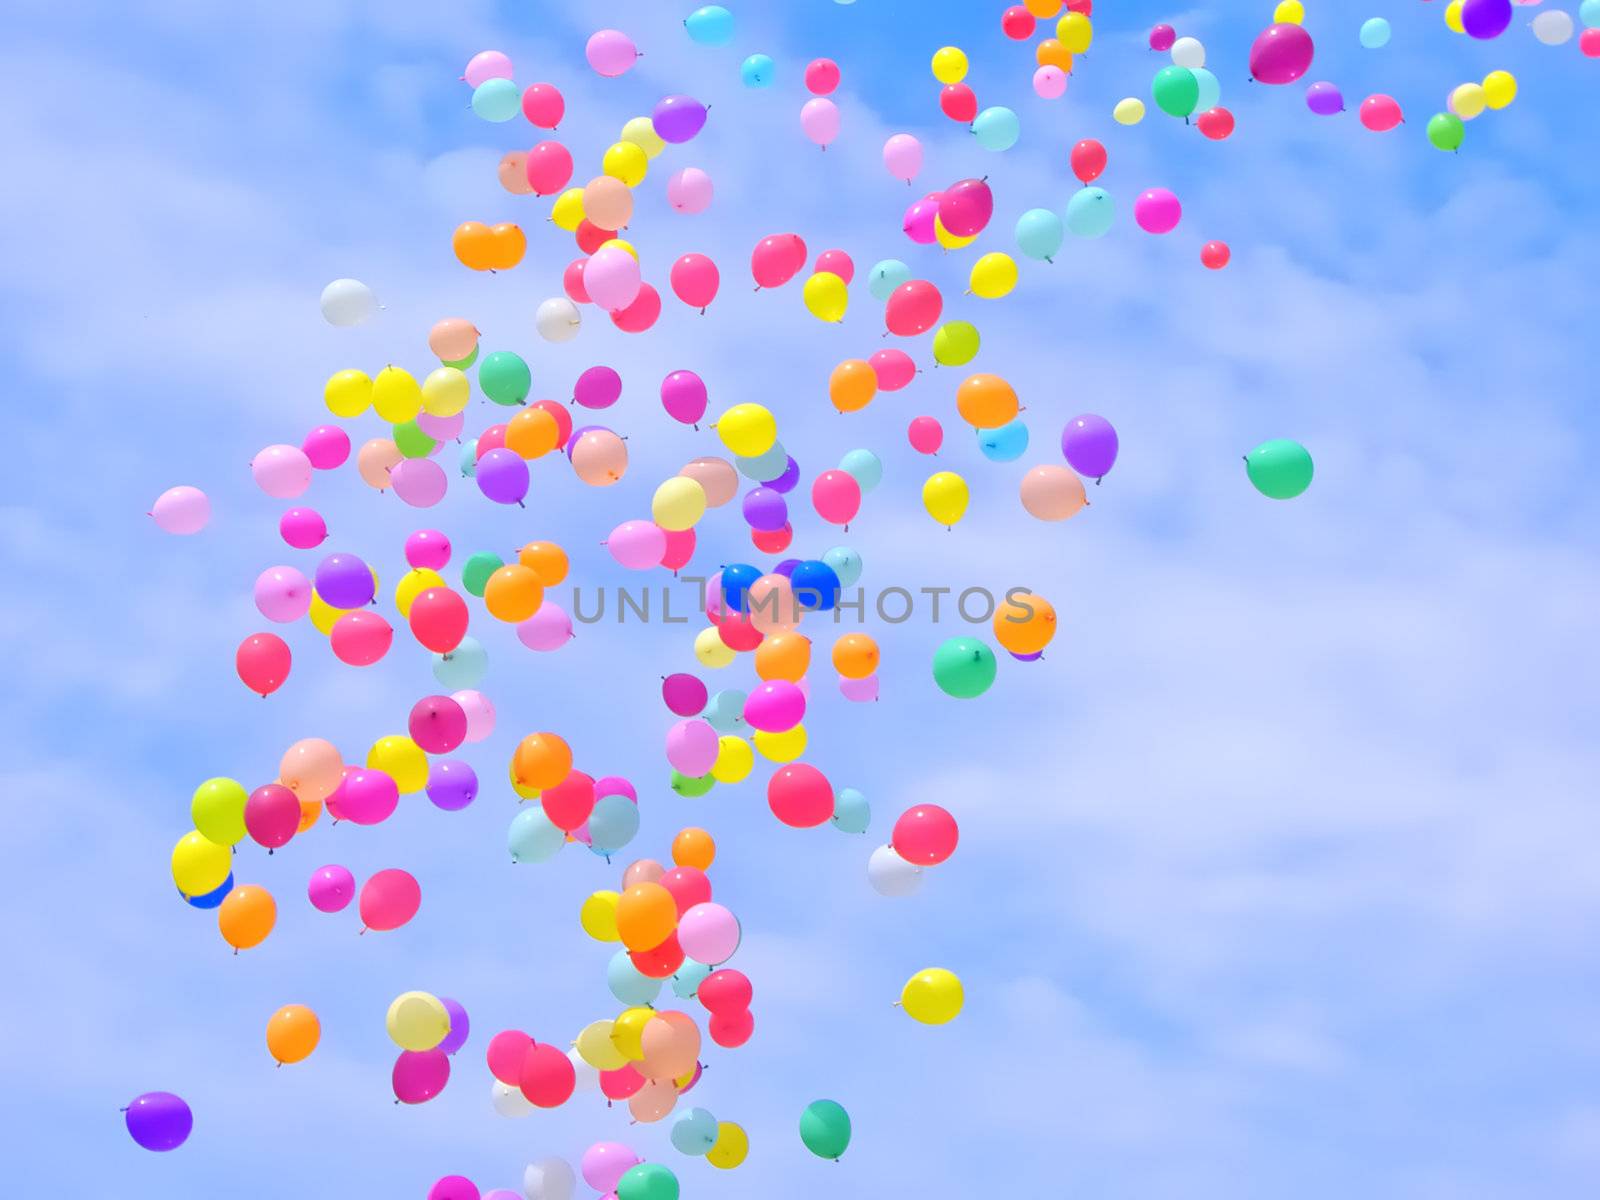 Balloons by Apolonia